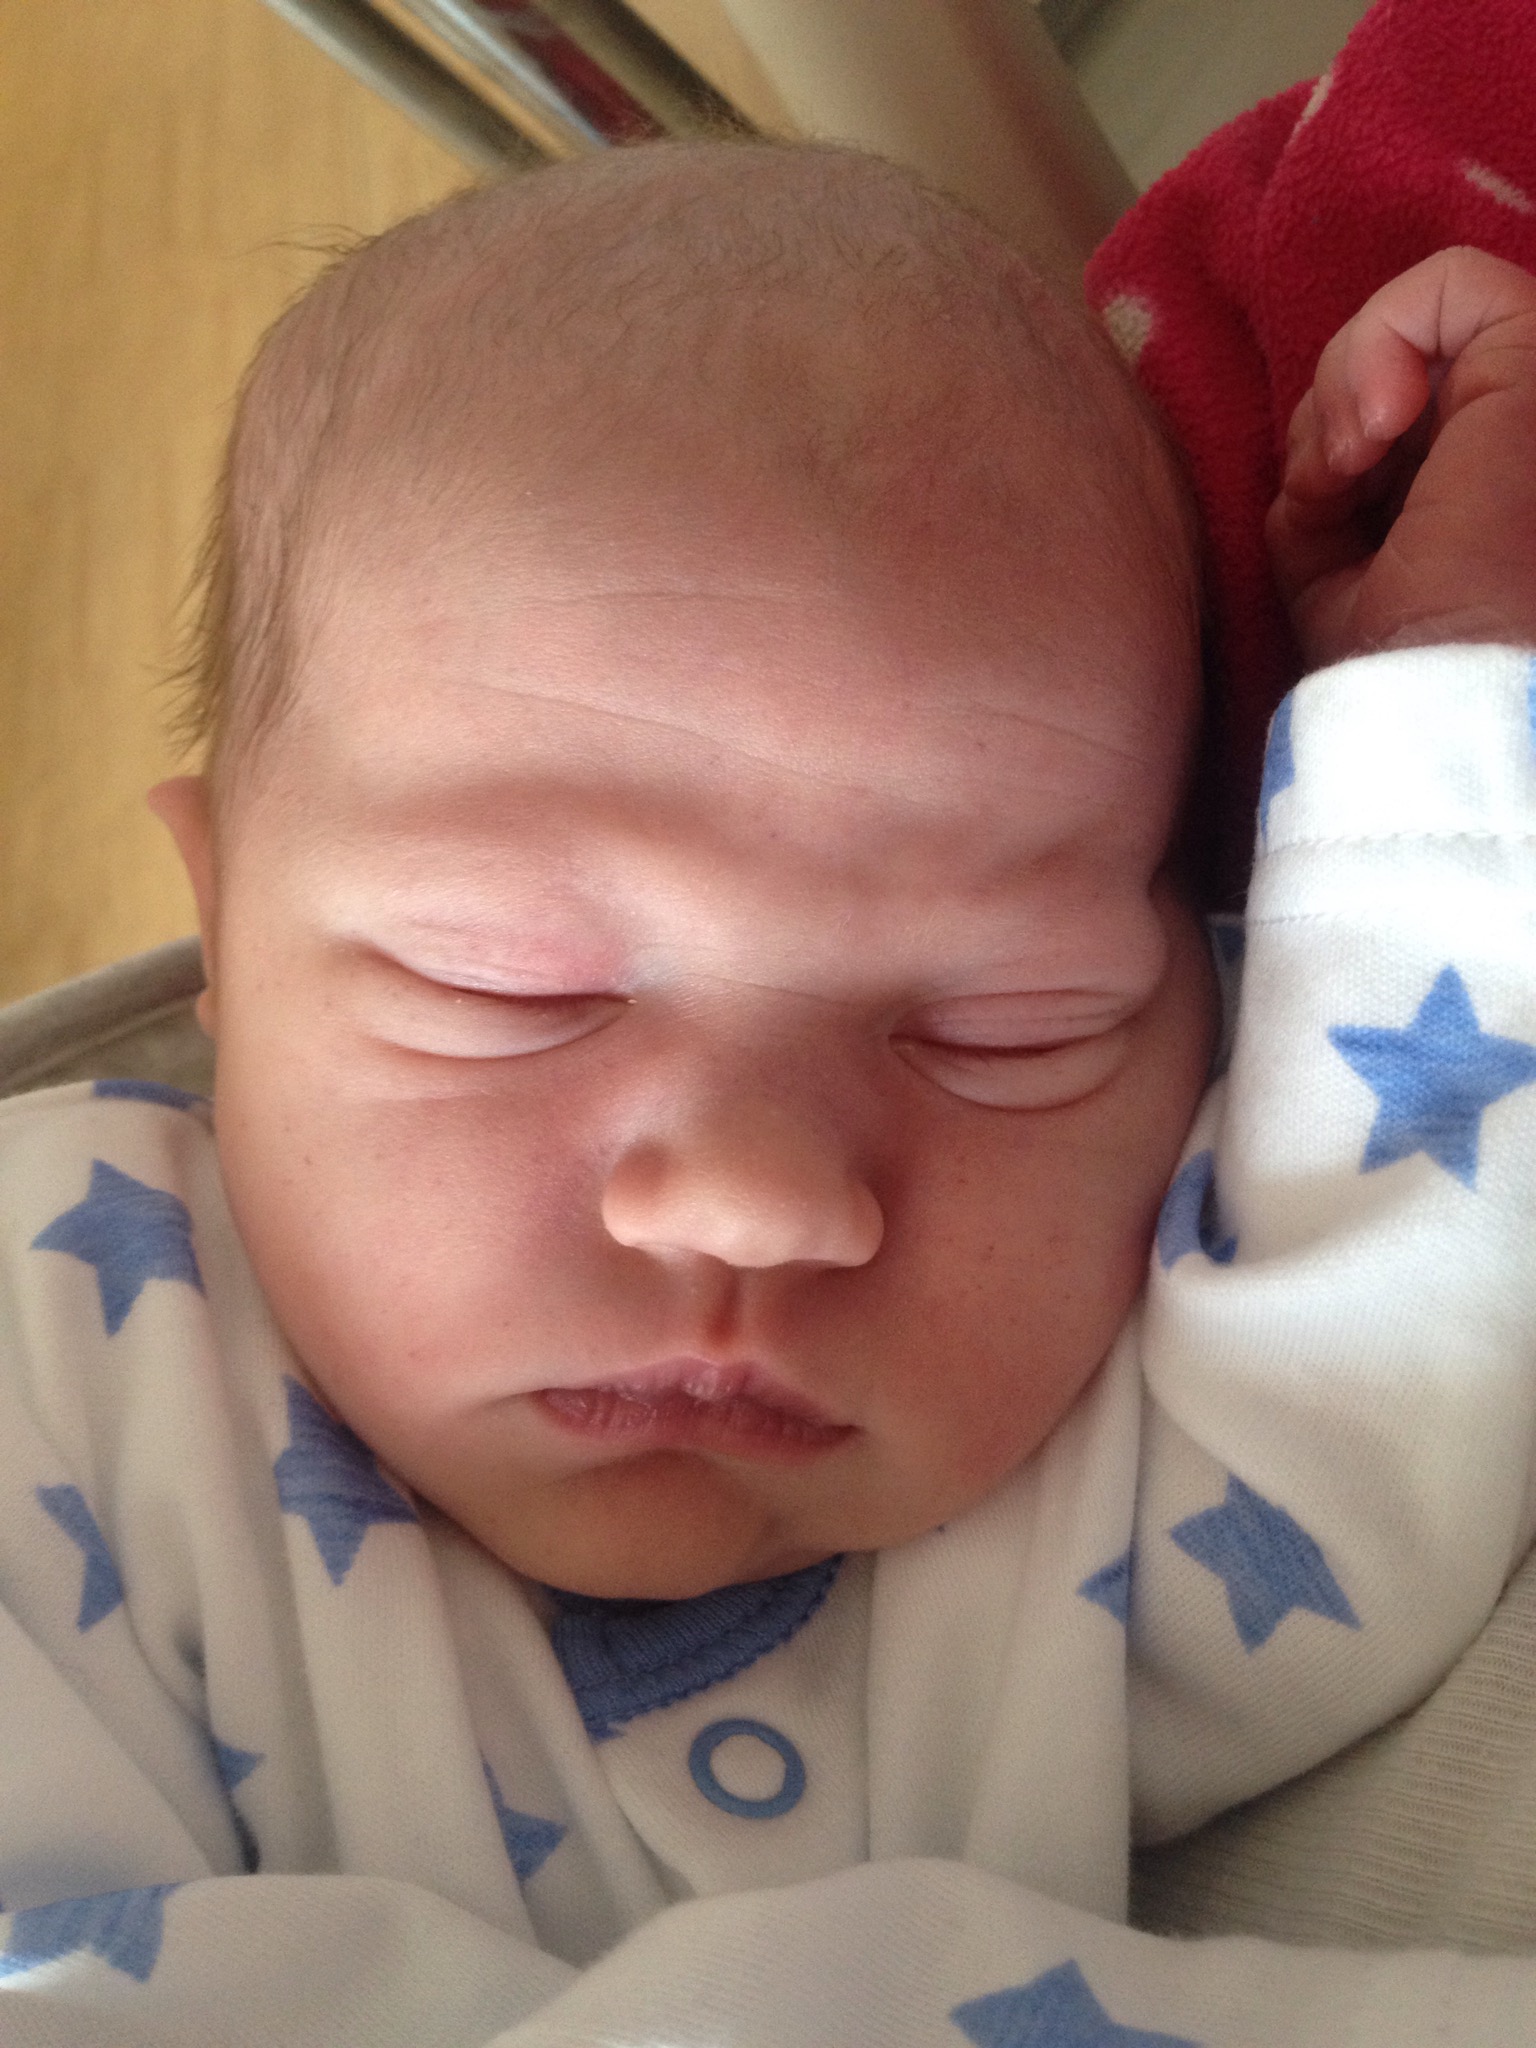 My 10th grandson was born today at 05:10hrs.